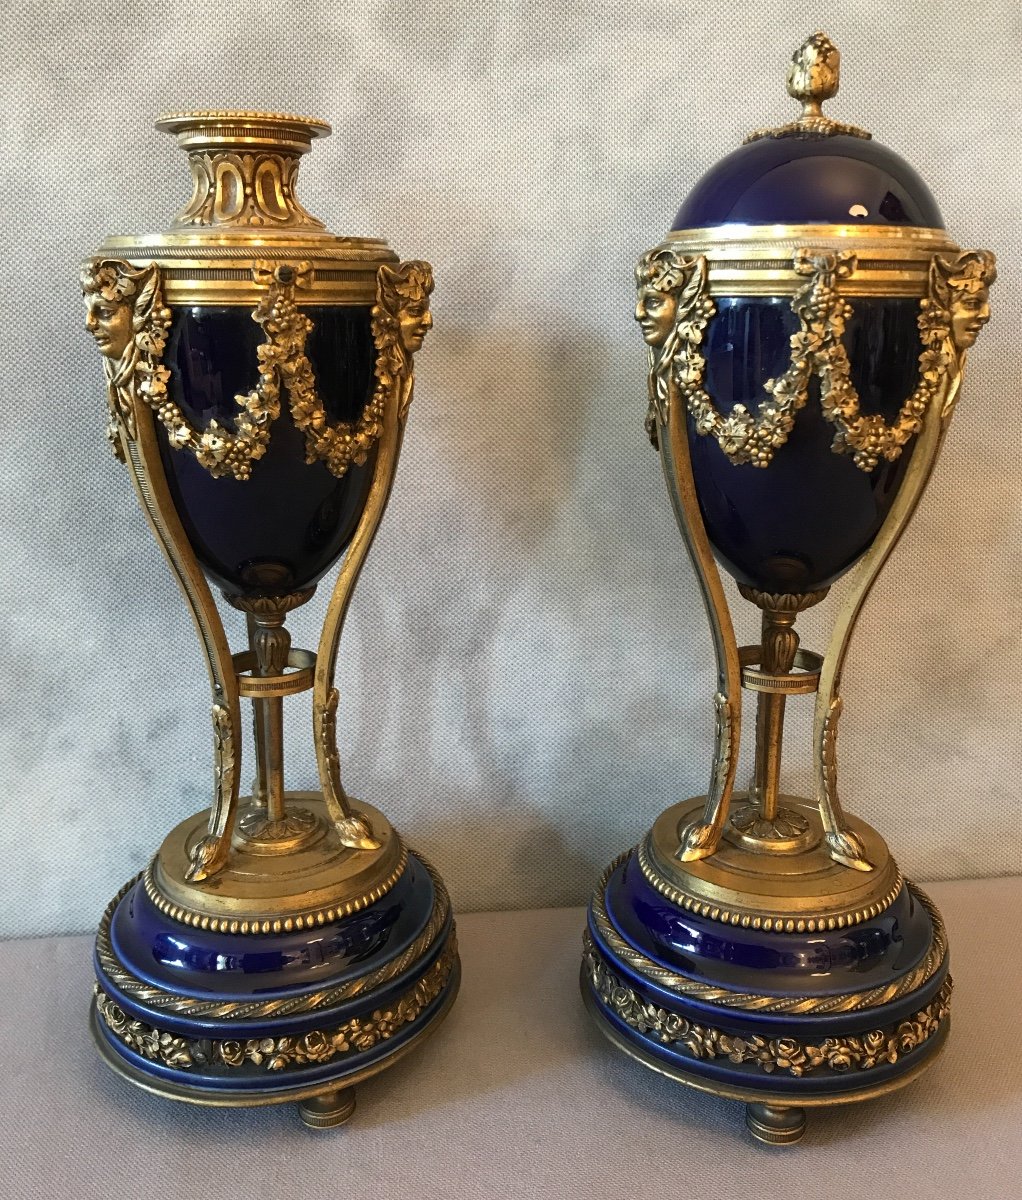 Pair Of Cassolettes Forming Candlesticks In Bronze And Blue Porcelain From The 19th Century-photo-7